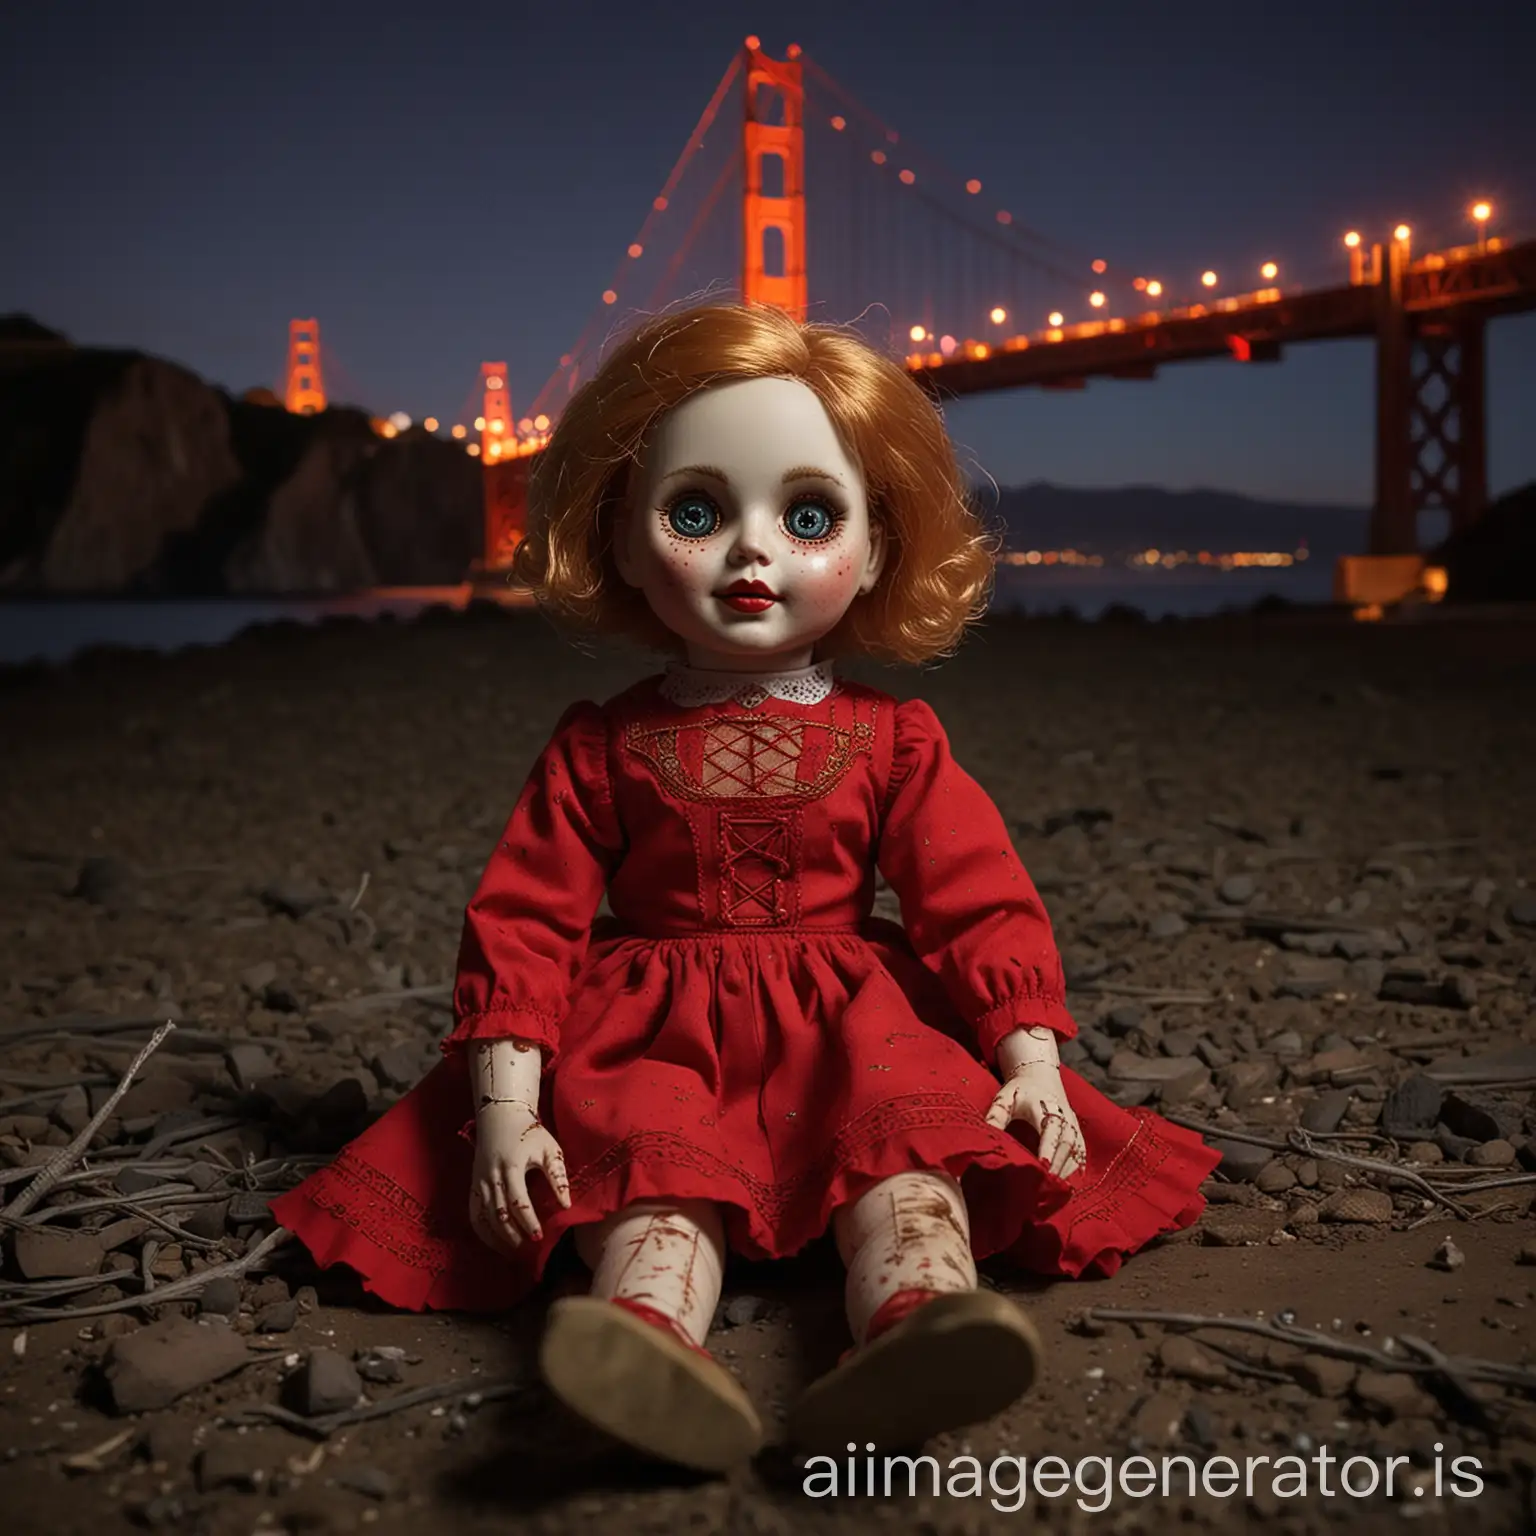 create a portrait image of a creepy doll inspired by the "Golden Gate Doll" in California, in broad night time, laying on the ground  facing the camera, with The Golden Gate Bridge in the background, 
and she is wearing red
